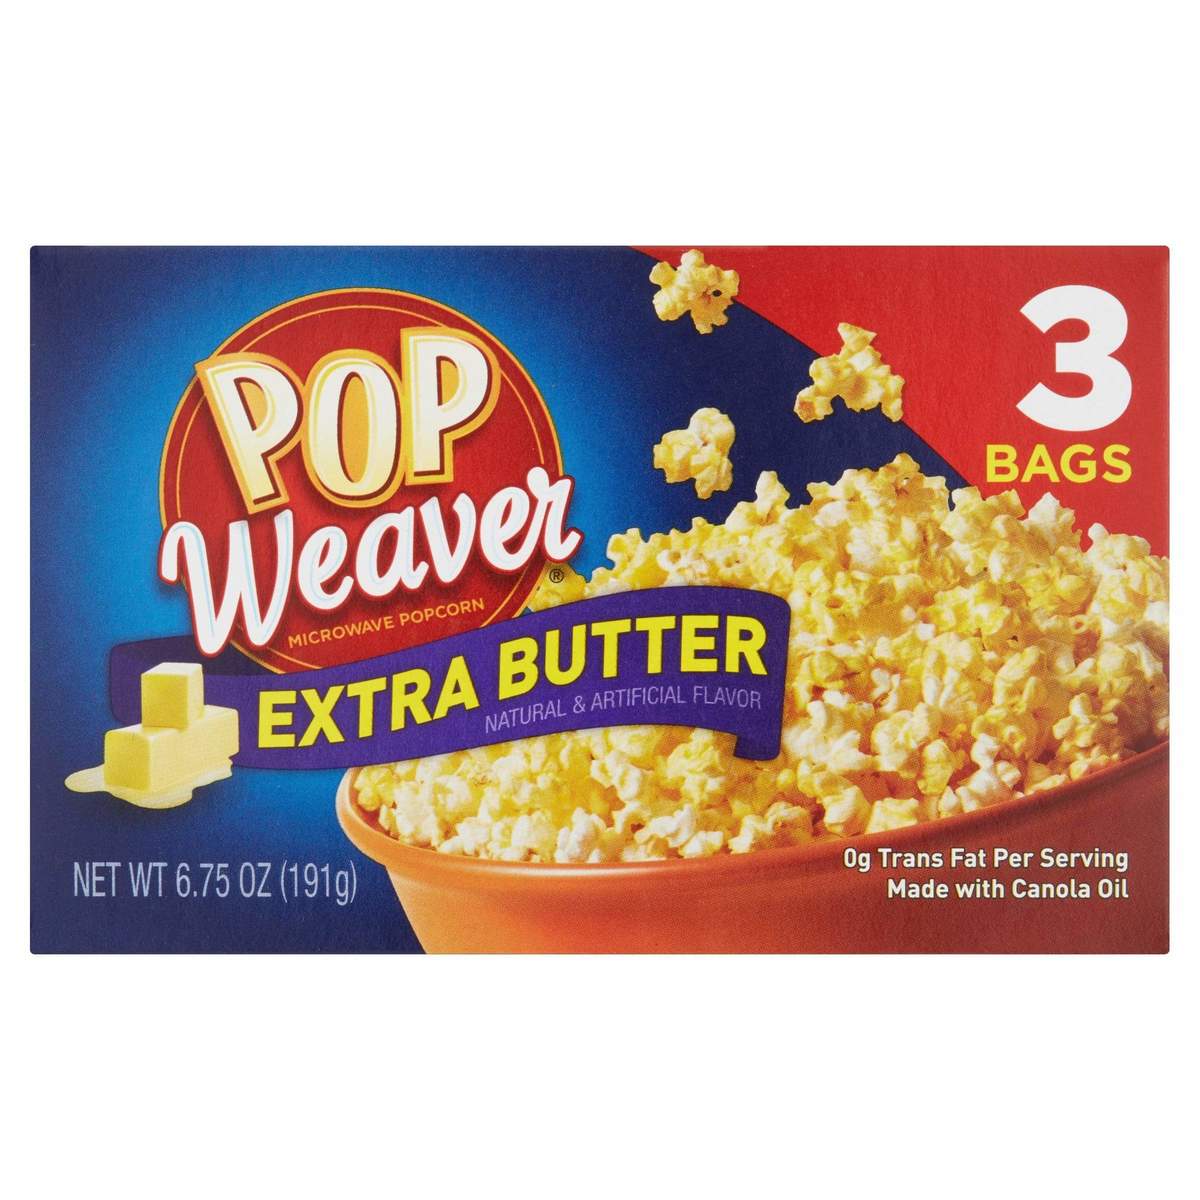 Pop Weaver Extra Butter Microwave Popcorn Case of 36 (12 x 3 Bags) ***NOW AVAILABLE IN CANADA***